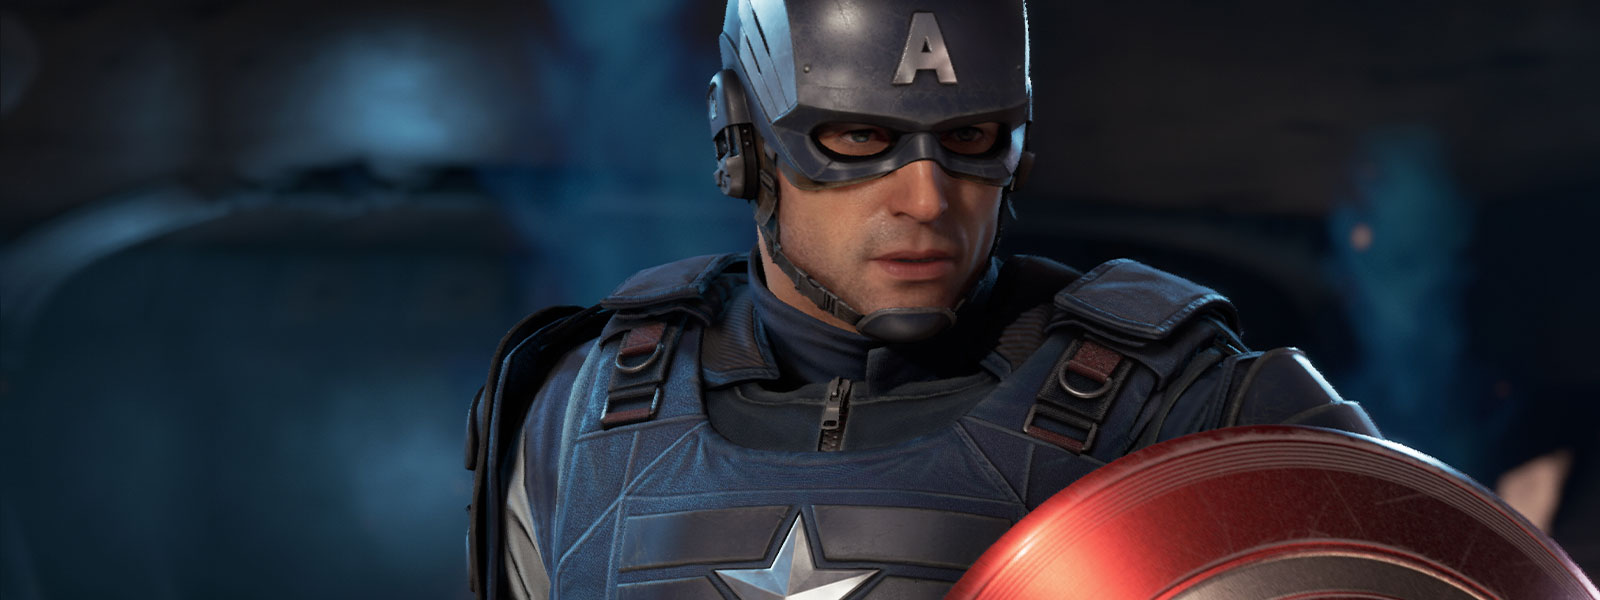 Captain American from Marvel’s Avengers with his shield